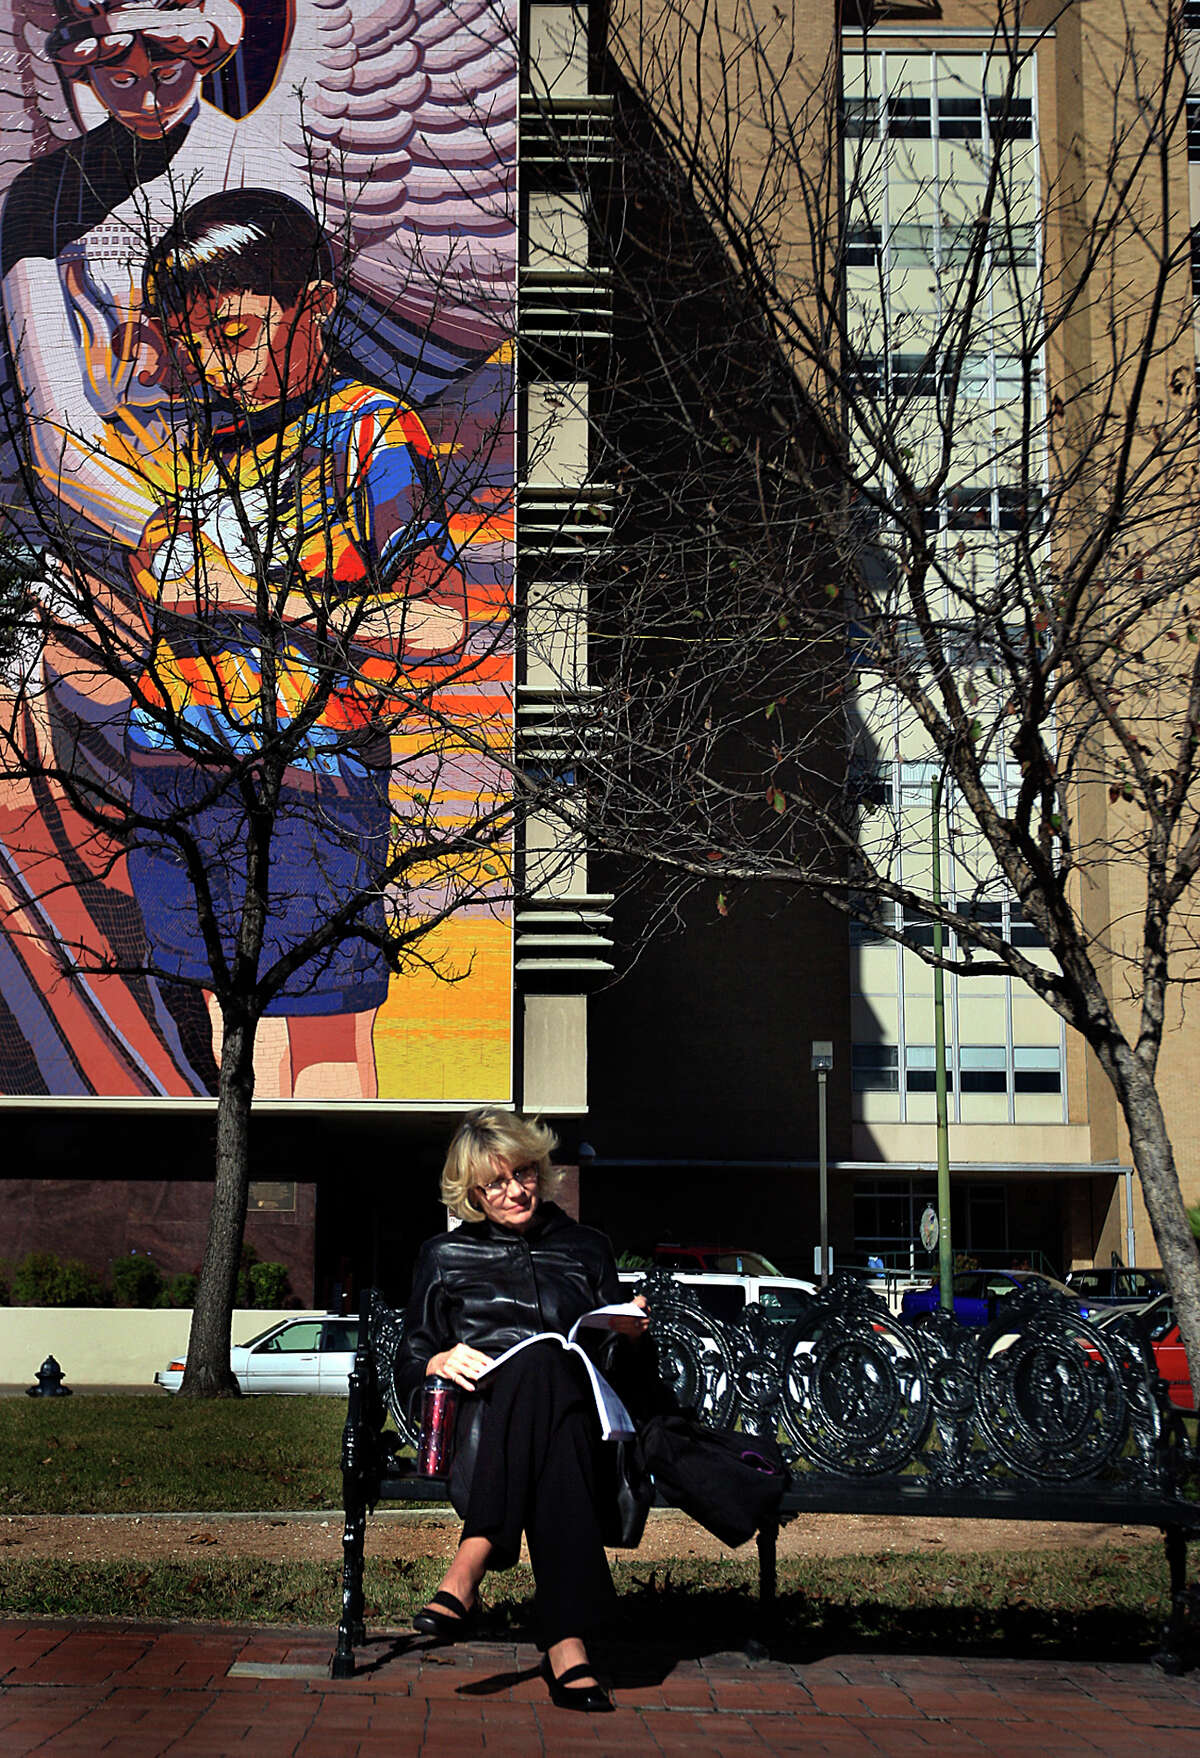 Dian Blanchard reads while basking in the sun Tuesday, January 6, 2009, at Milam Park. Jesse Trevino's 90-foot-tall mural, "Spirit of Healing," is in the background.